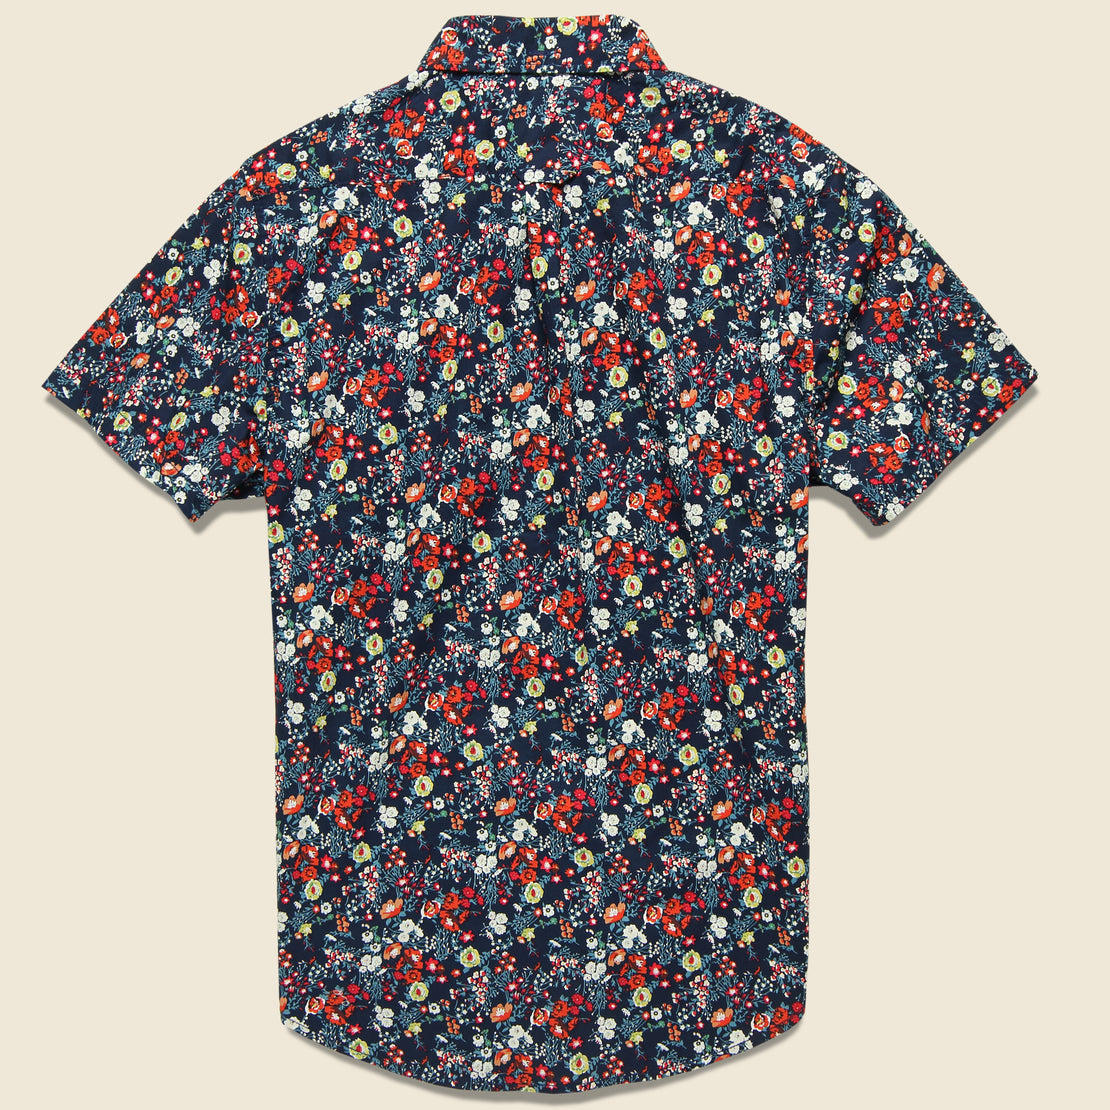 Wild Flower Shirt - Navy - Modern Liberation - STAG Provisions - Tops - S/S Woven - Floral